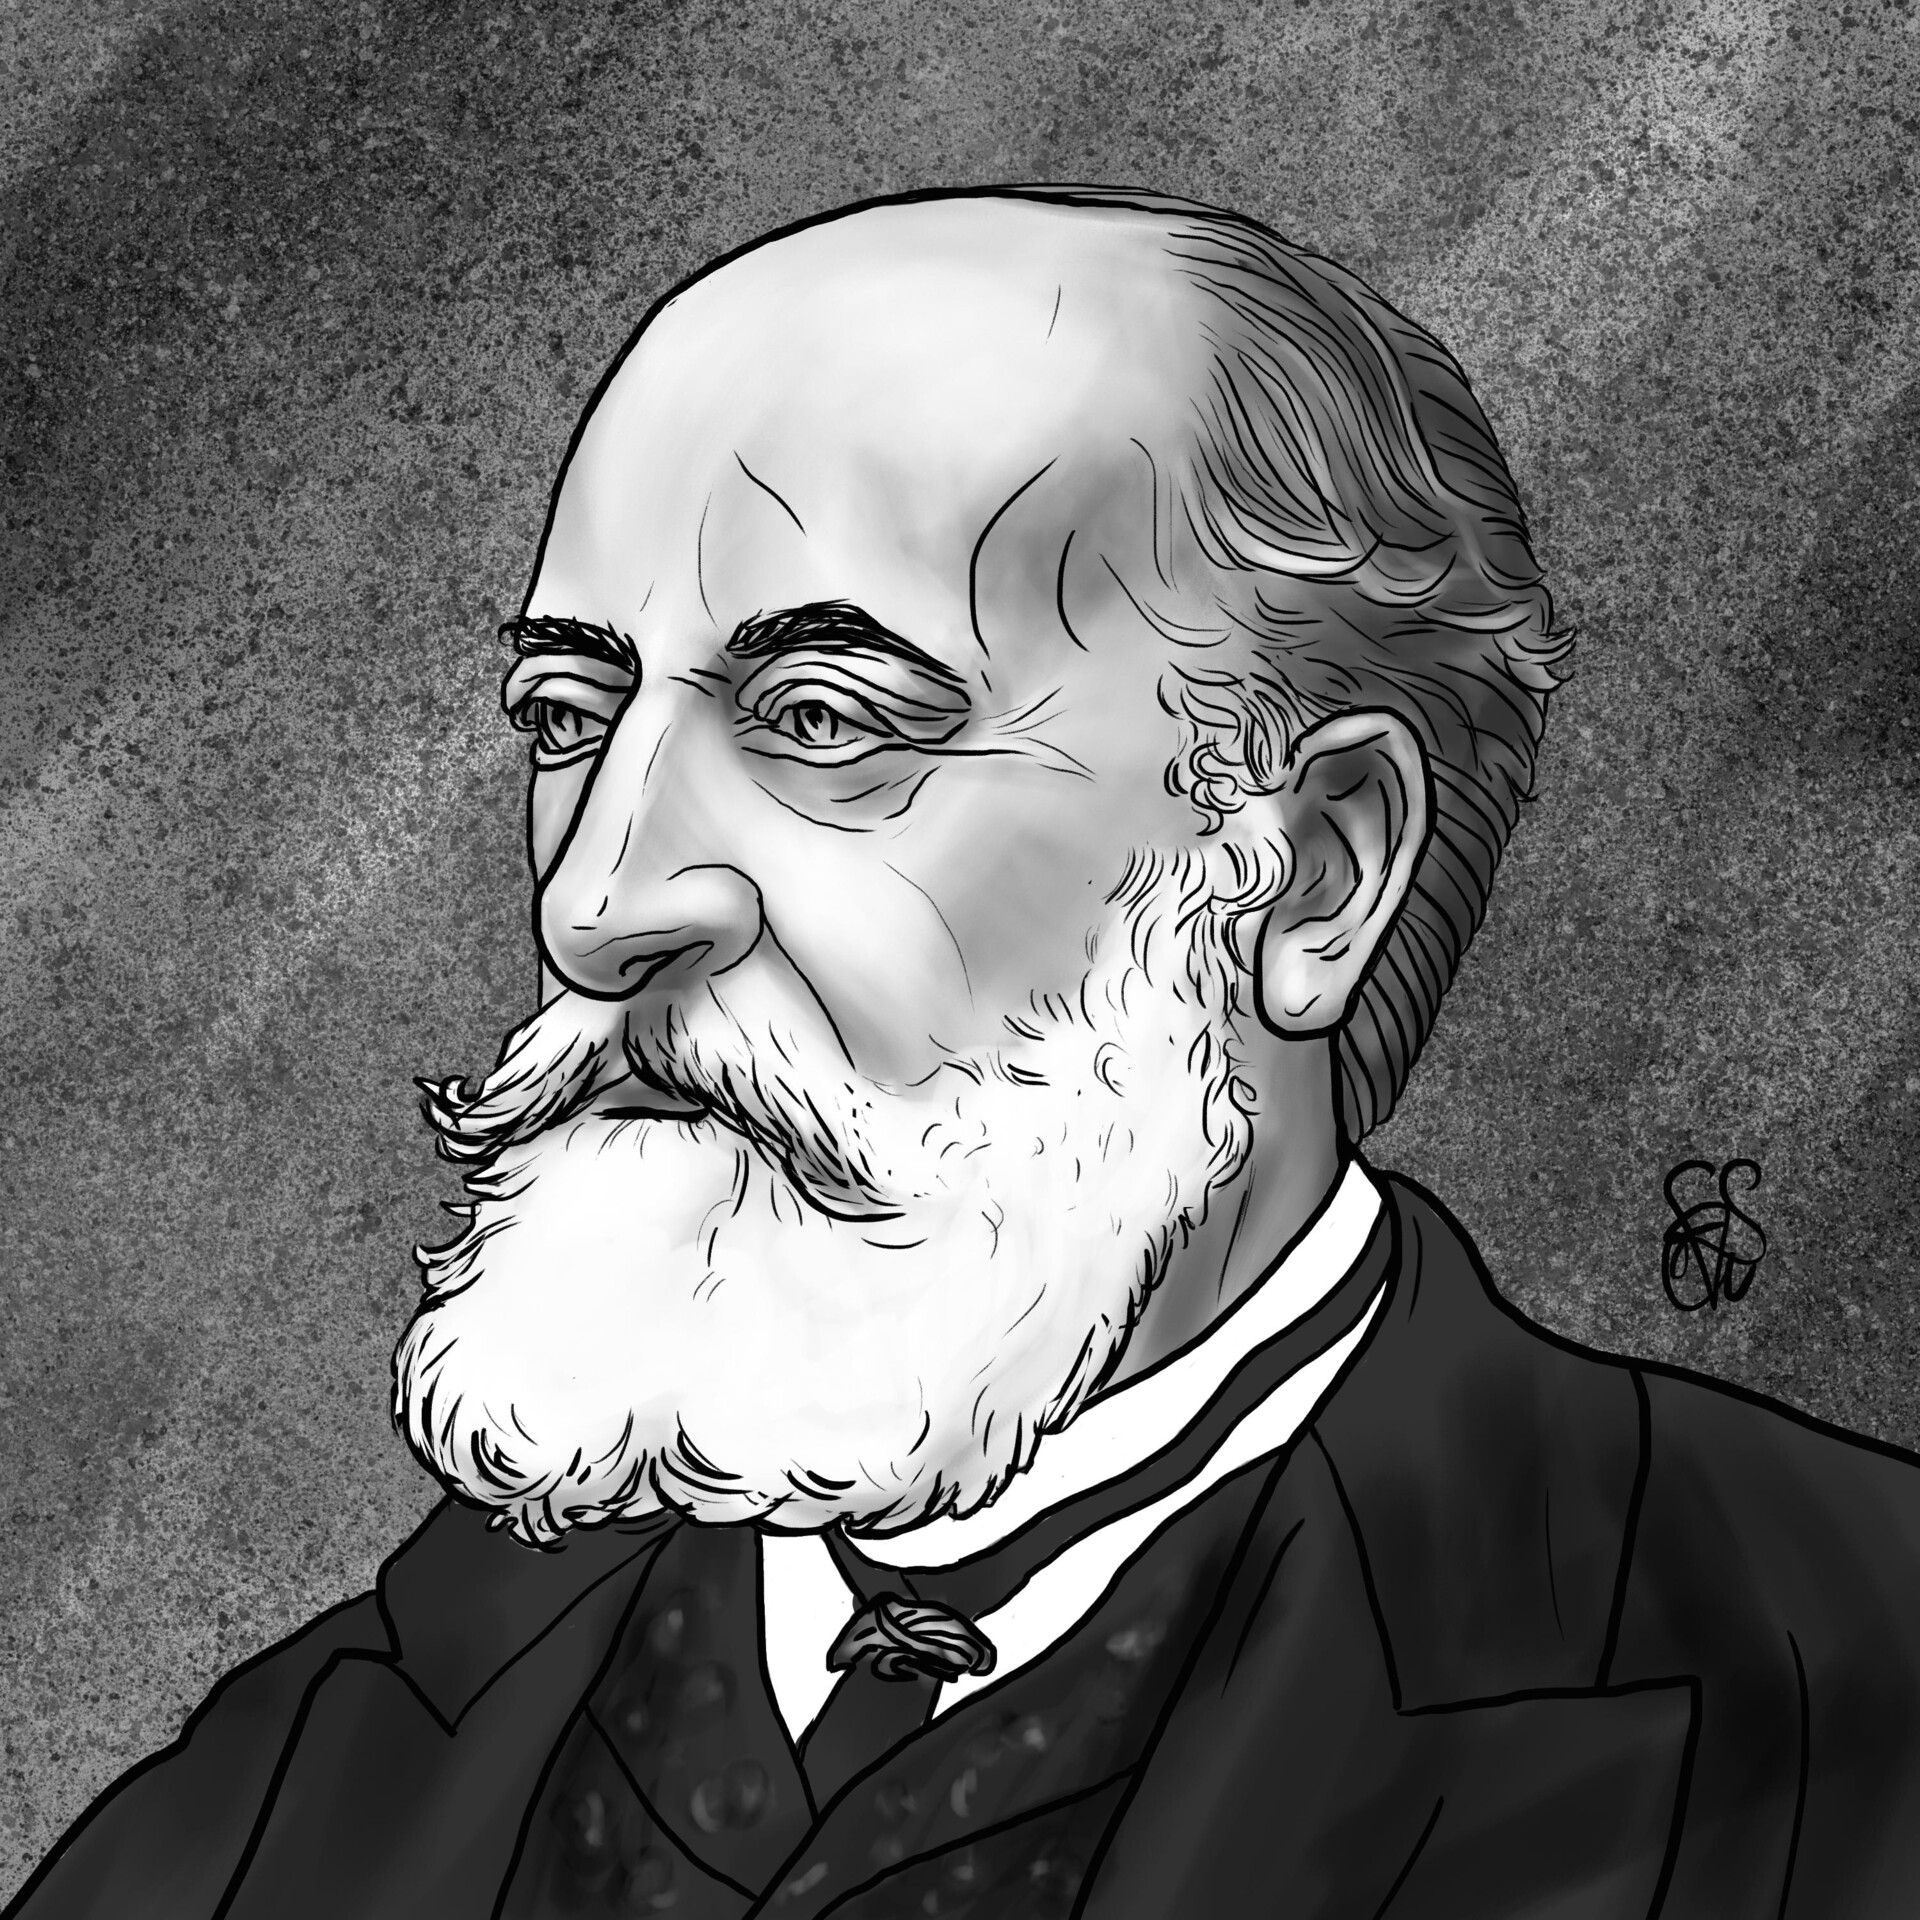 Camille Saint-Saëns – a portrait for the 100th anniversary of his